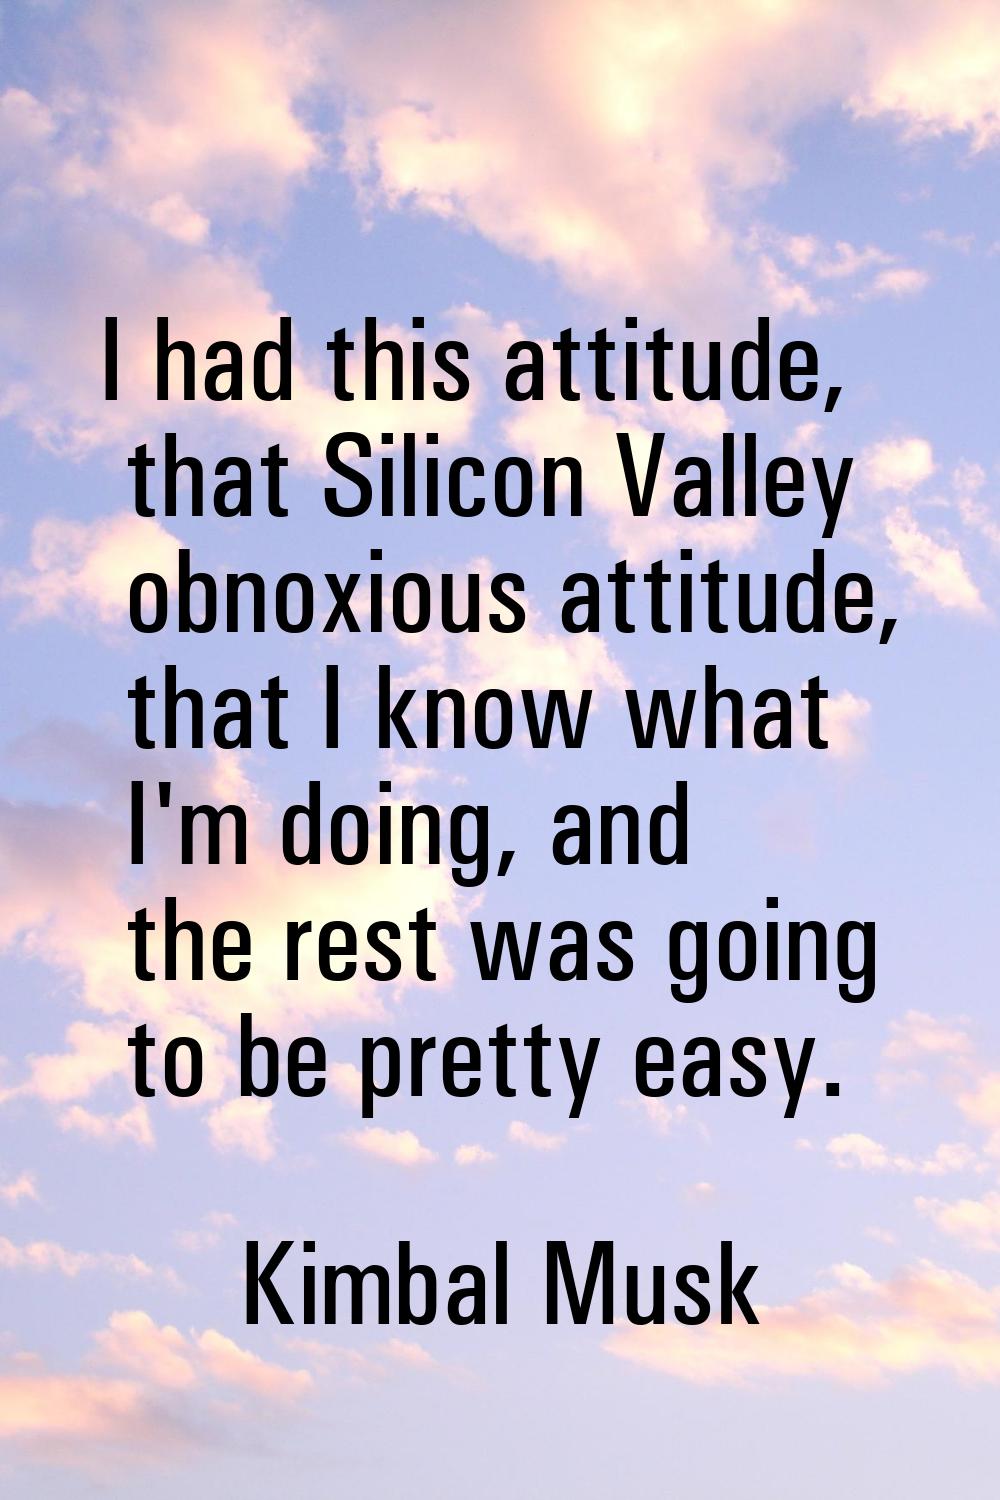 I had this attitude, that Silicon Valley obnoxious attitude, that I know what I'm doing, and the re